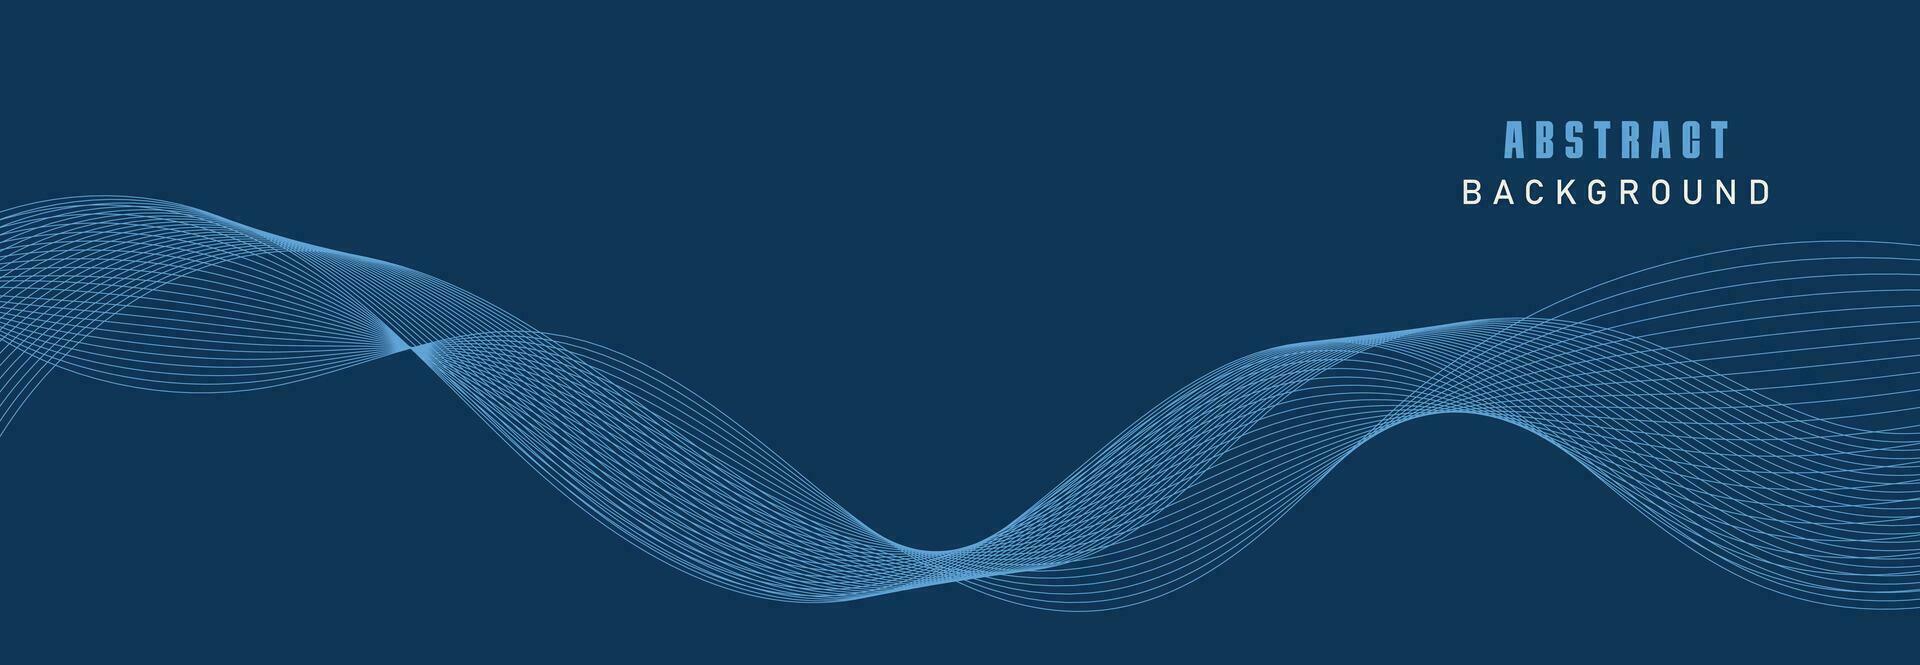 Vector Data Technology Background. Dotted Halftone Waves Connecting Dots and Lines on a Blue Background.